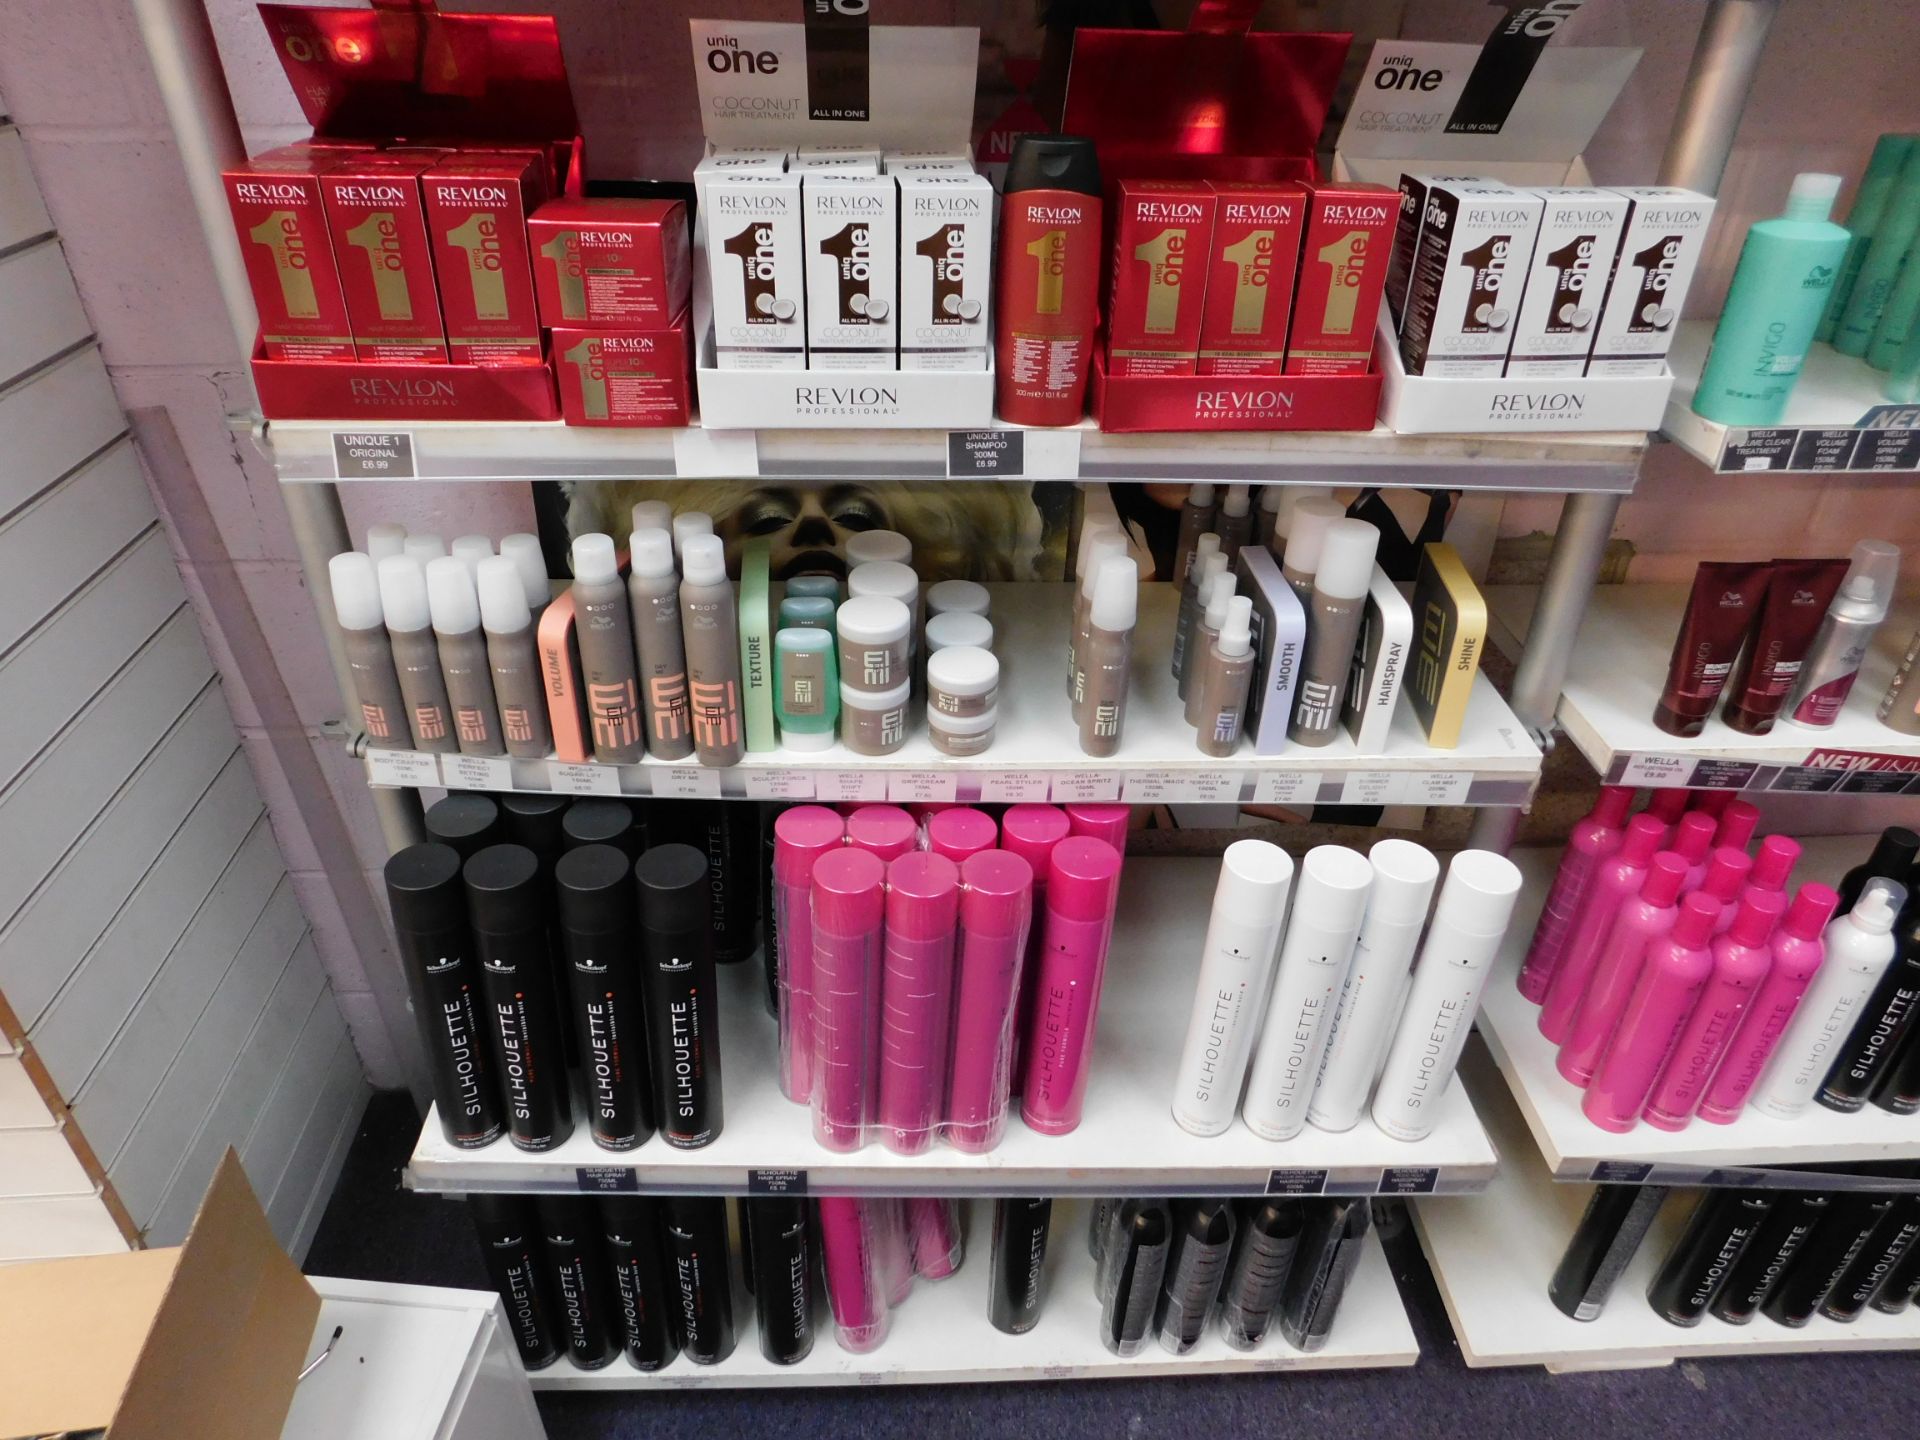 Contents to 1 bay of shop display shelving, to include assortment of Revlon treatment products, - Image 2 of 2